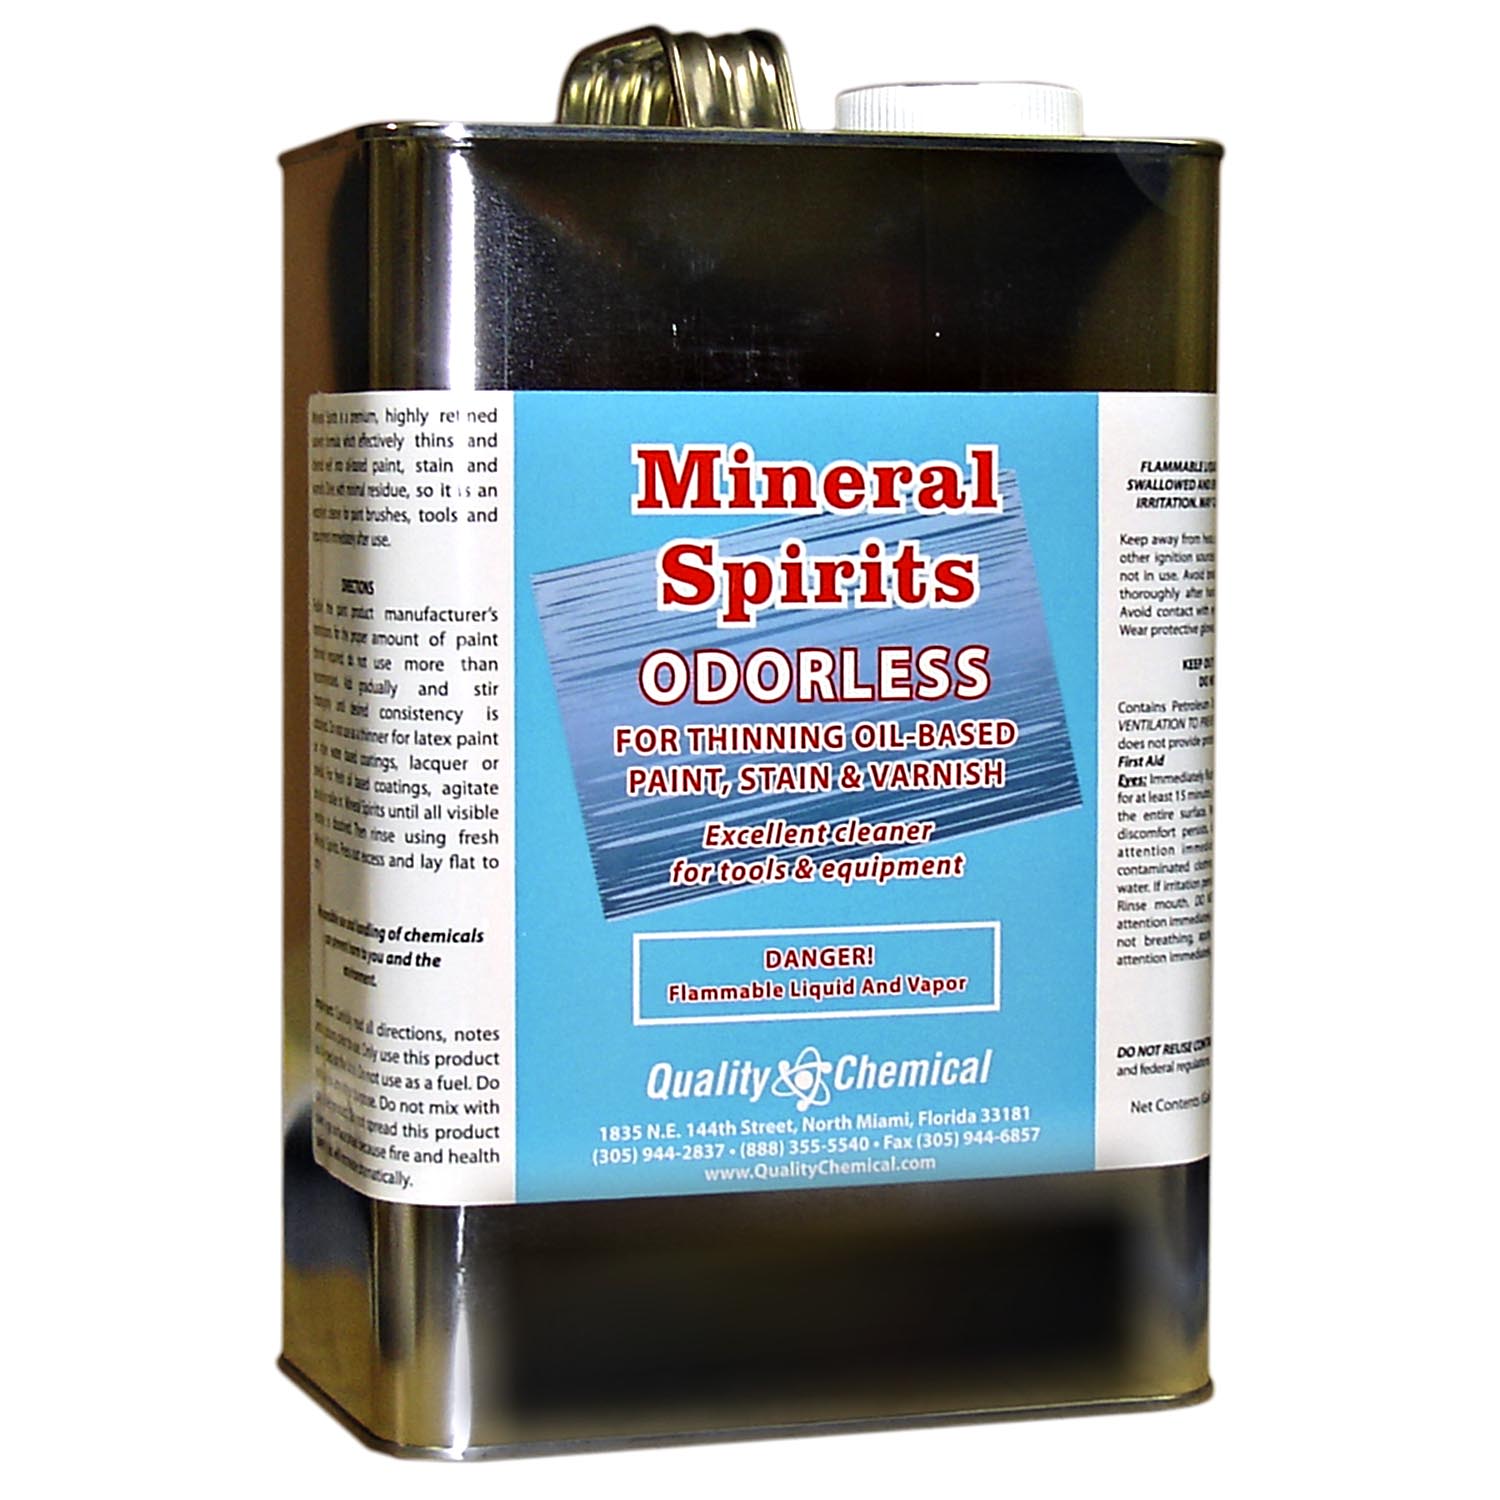 Quality Chemical Company - Mineral Spirits (Odorless)